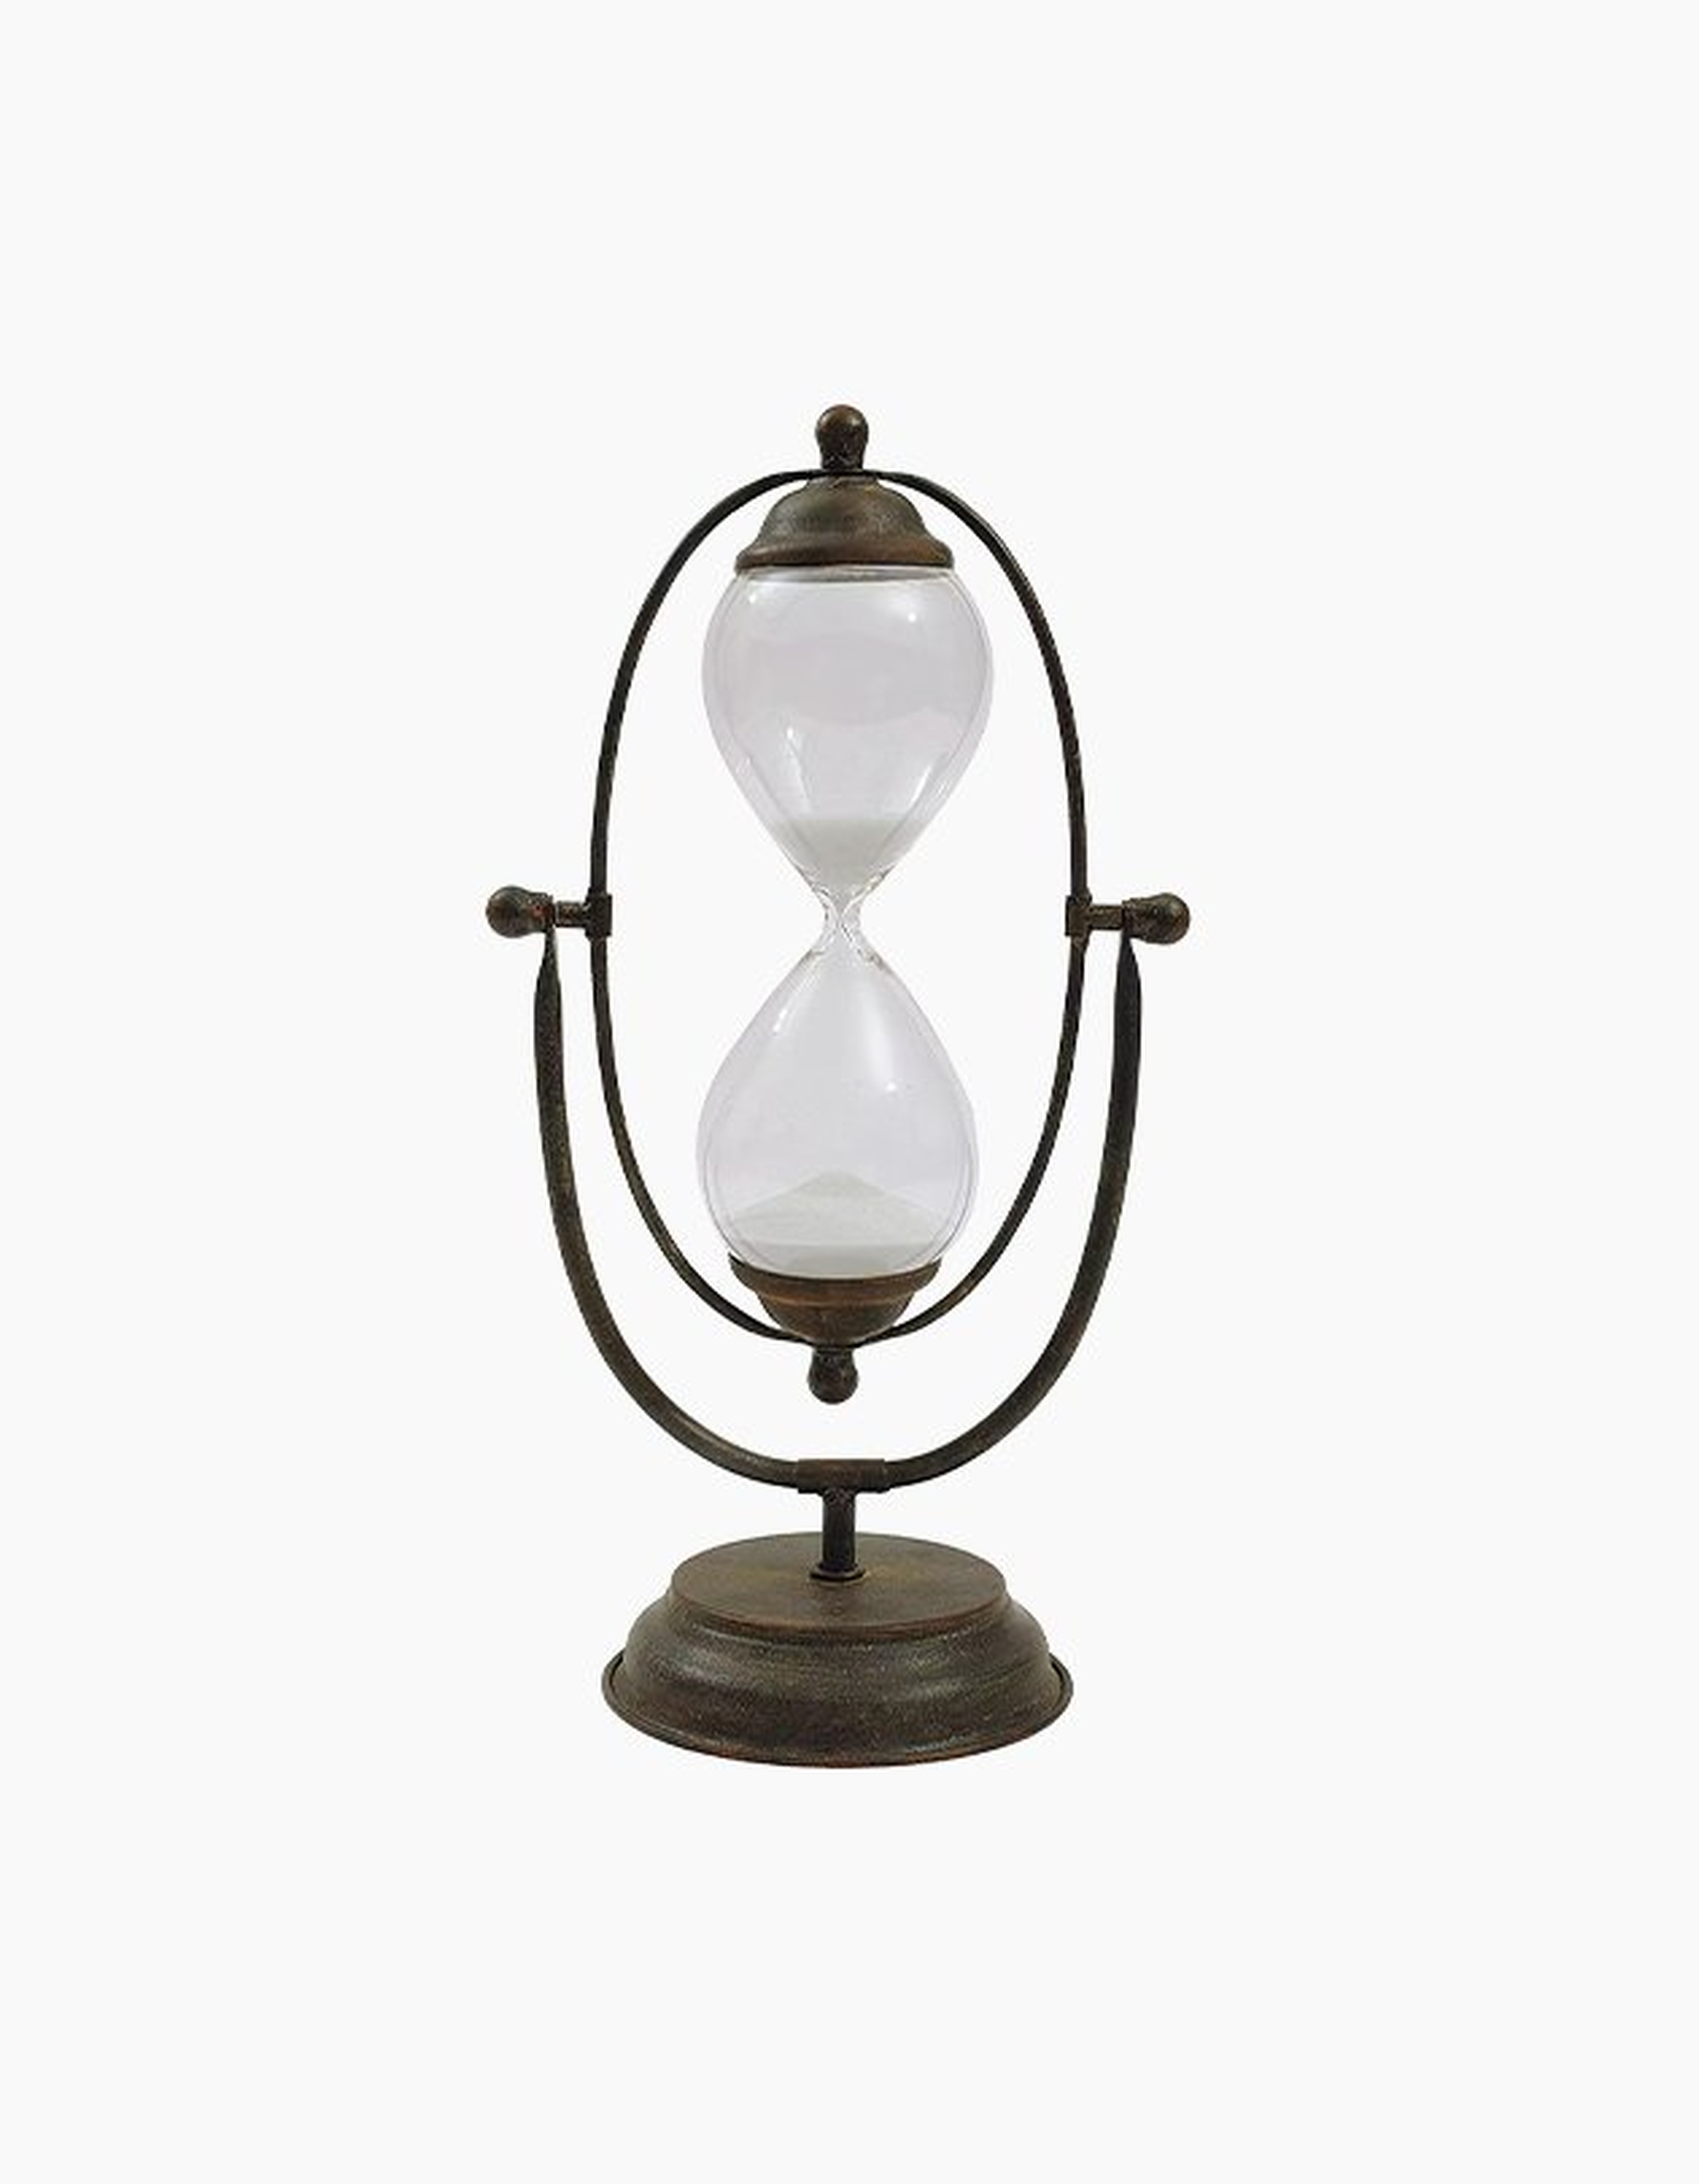 Decorative Metal Hourglass with White Sand, Rust - Nomad Home